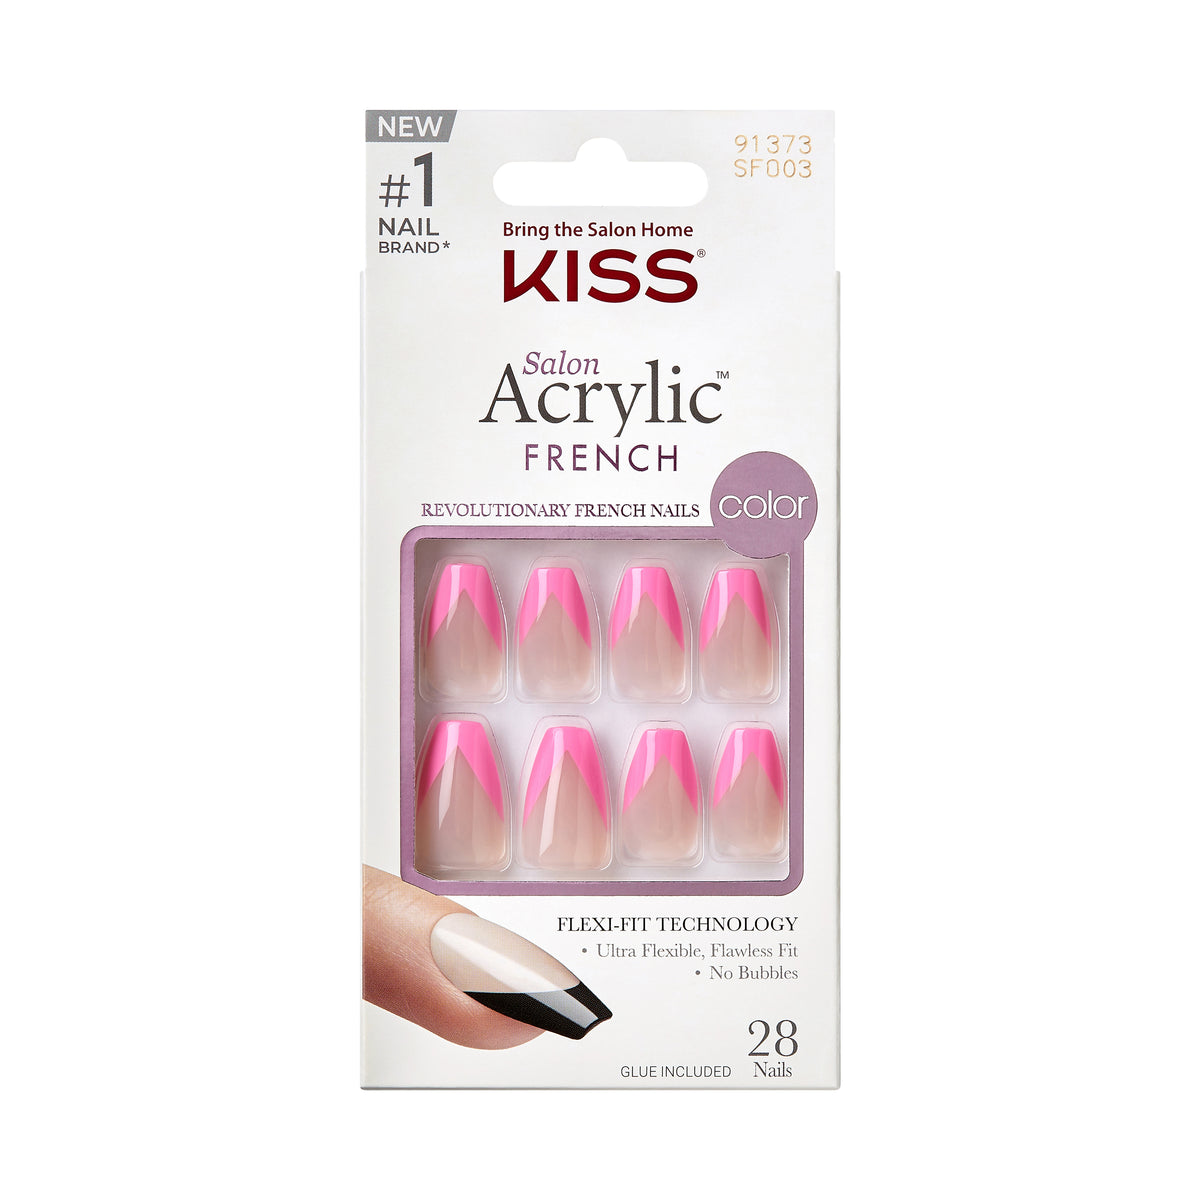 SALON ACRYLIC FRENCH COLOR SQUARED - KISS